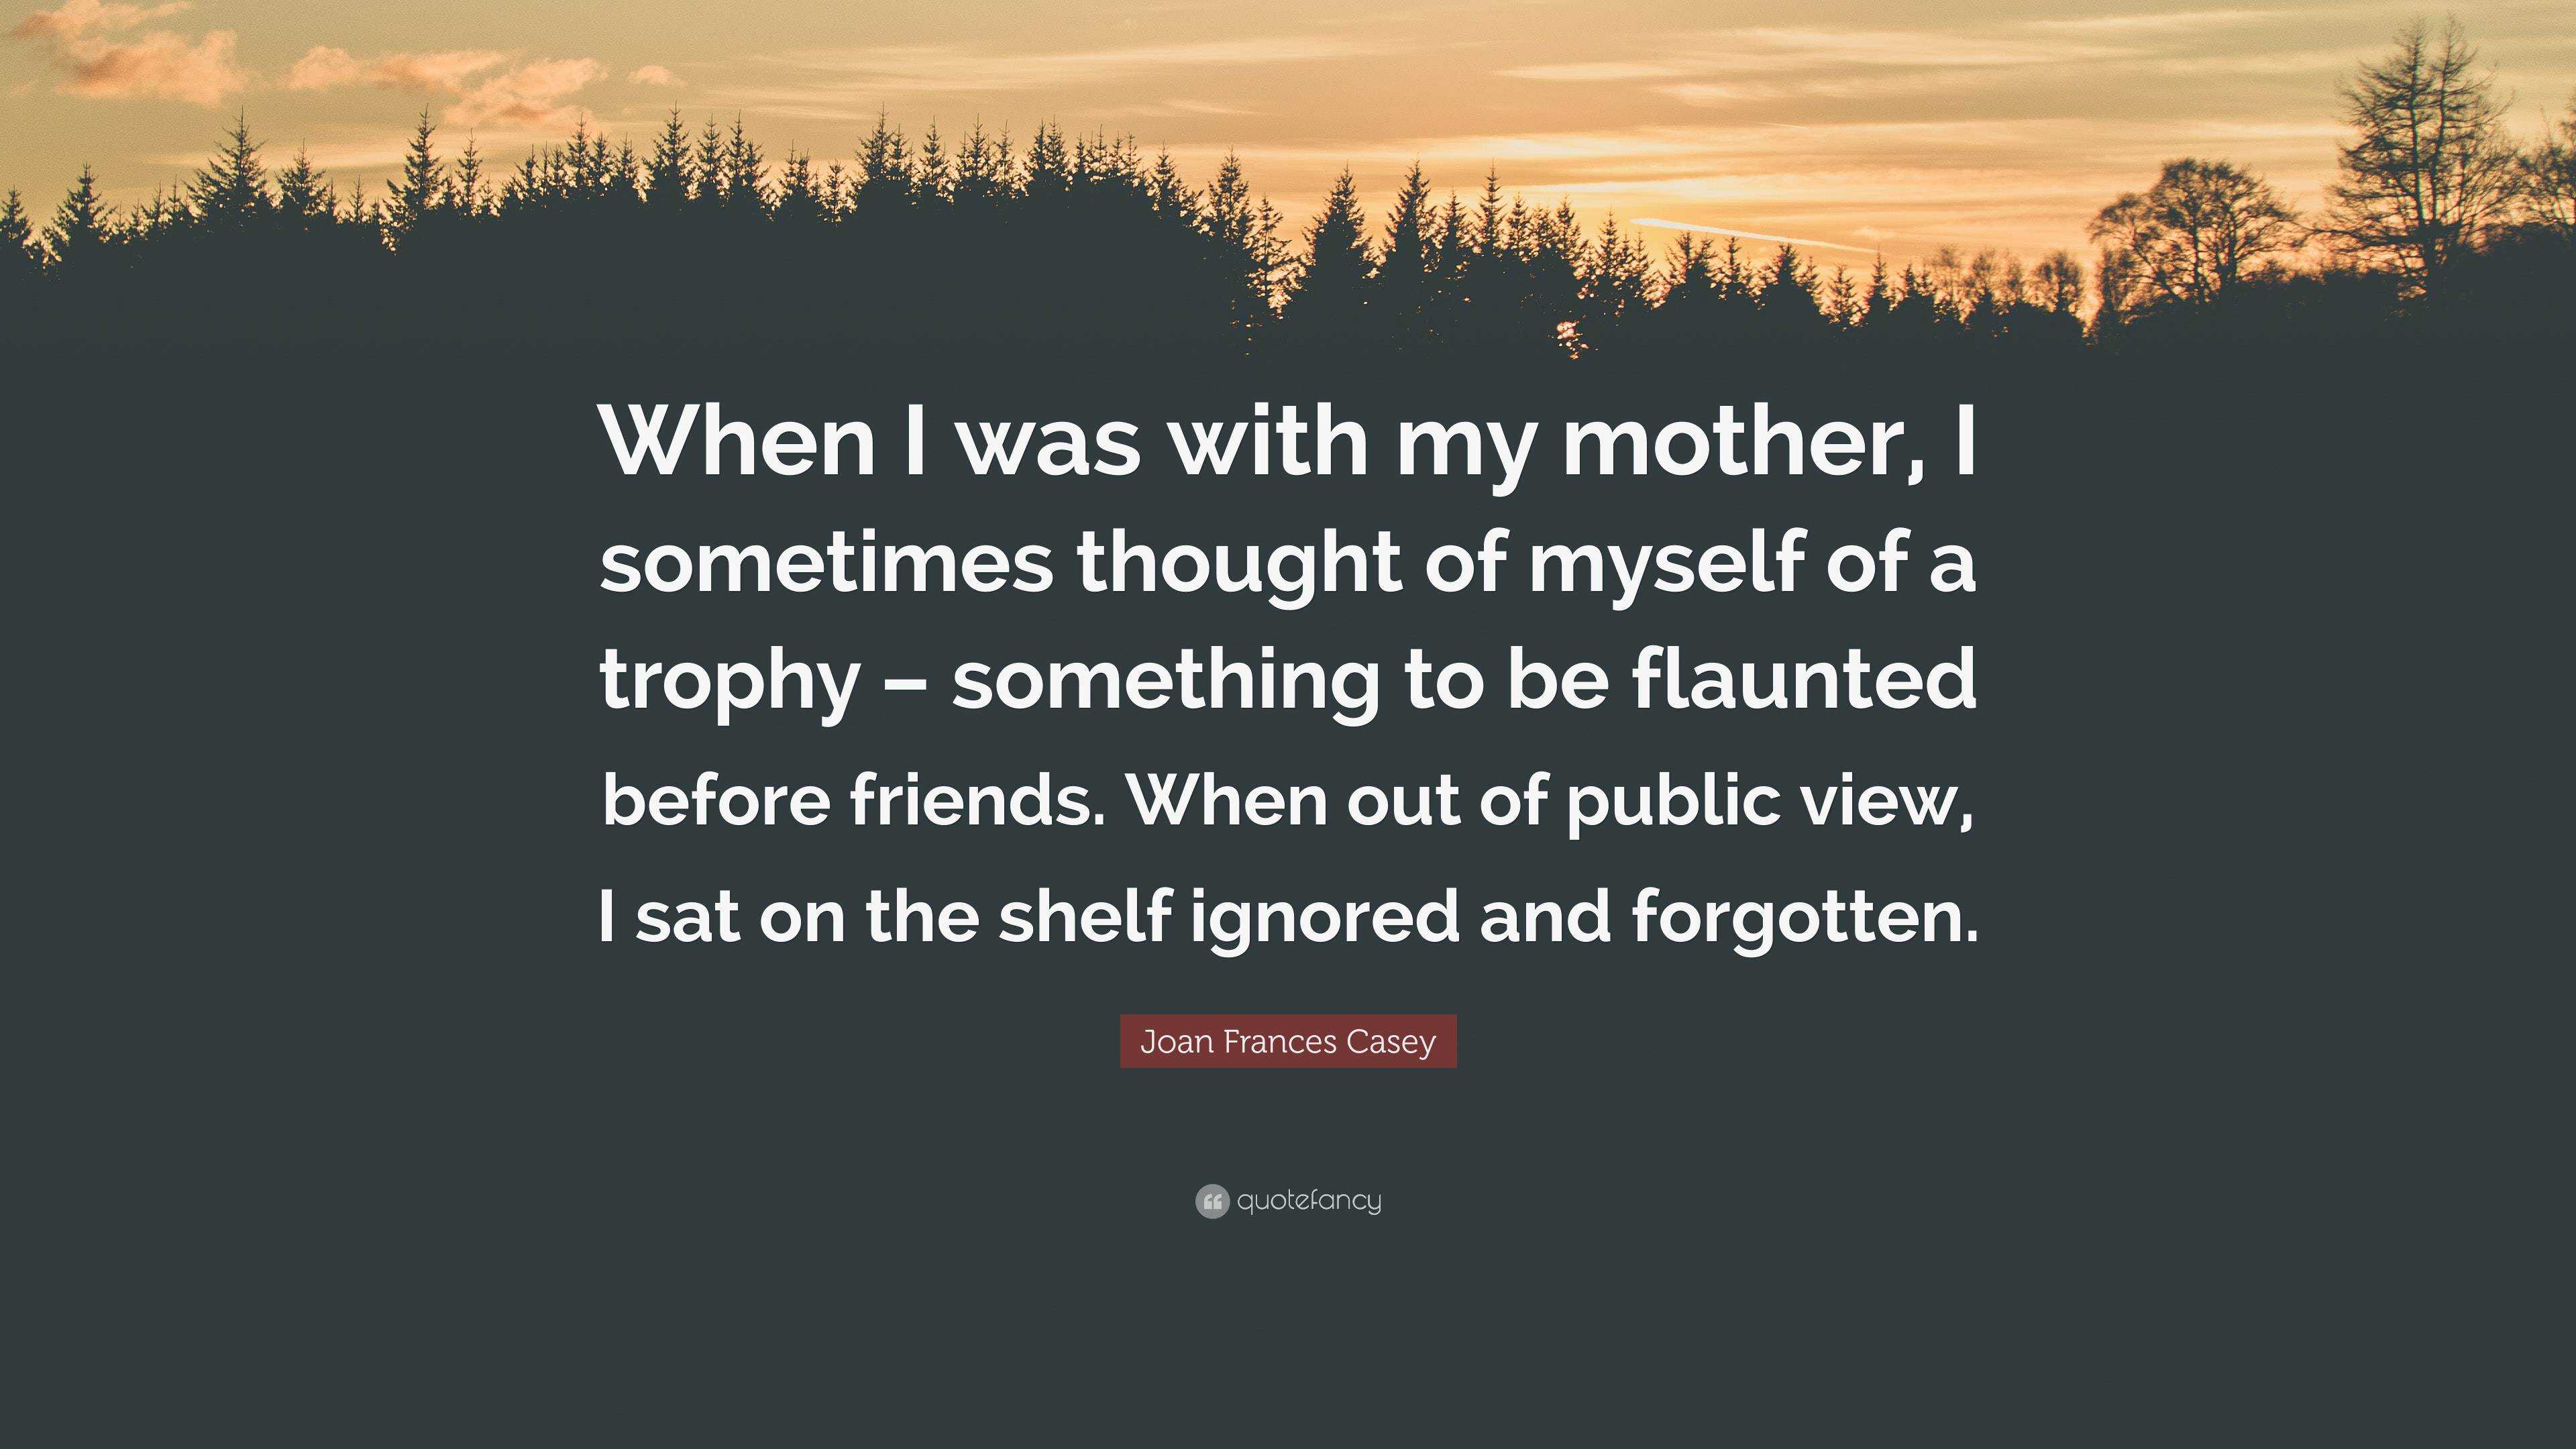 Joan Frances Casey Quote: “When I was with my mother, I sometimes ...